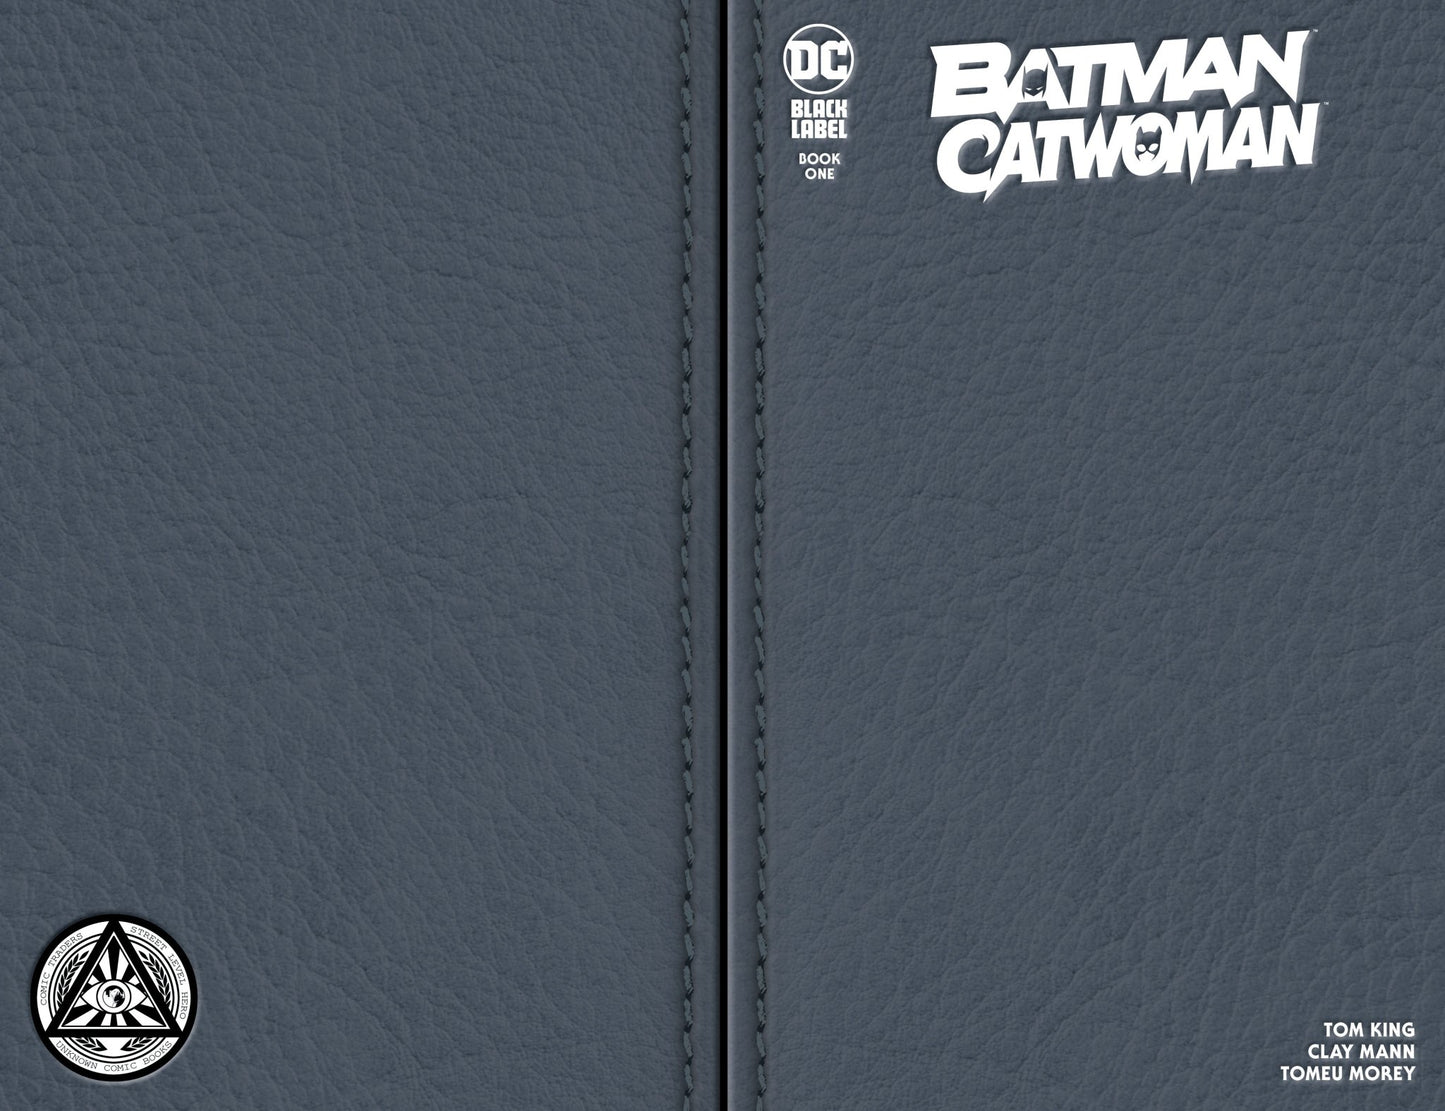 BATMAN CATWOMAN #1 (OF 12) UNKNOWN COMICS BLANK EXCLUSIVE VAR (12/02/2020) - FURYCOMIX